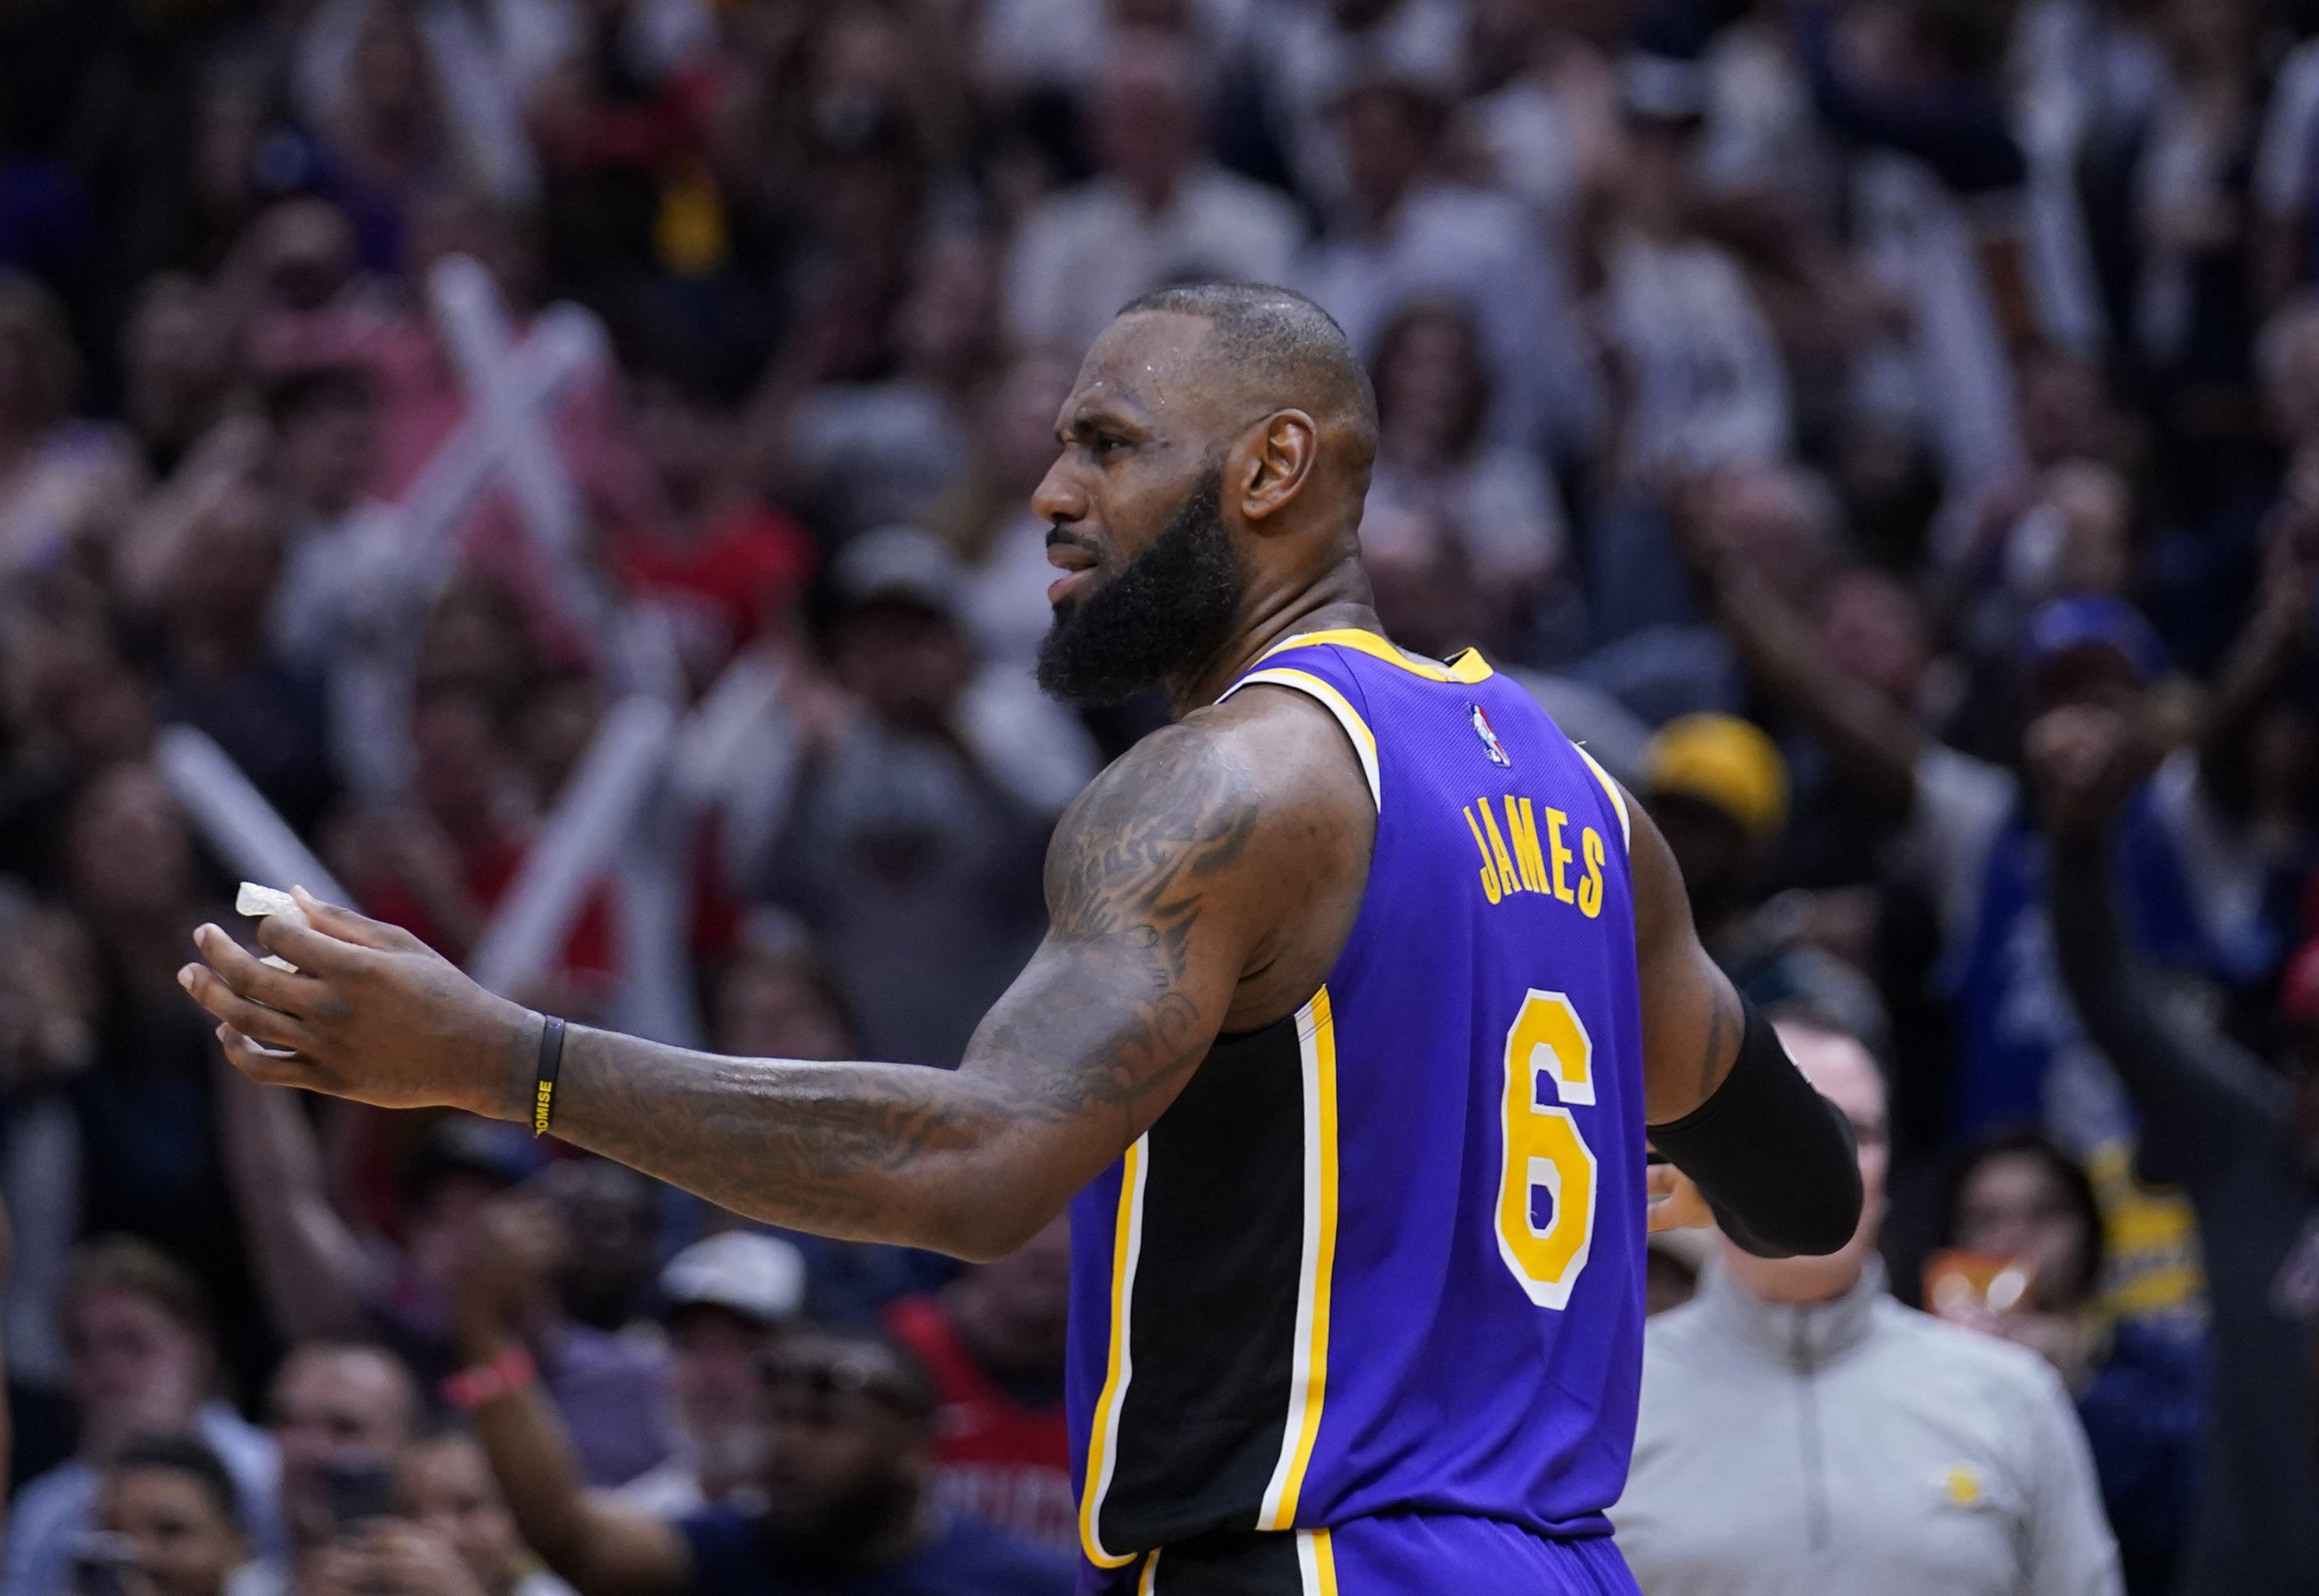 LeBron drops 21 in return as new-look Lakers breeze by Pelicans